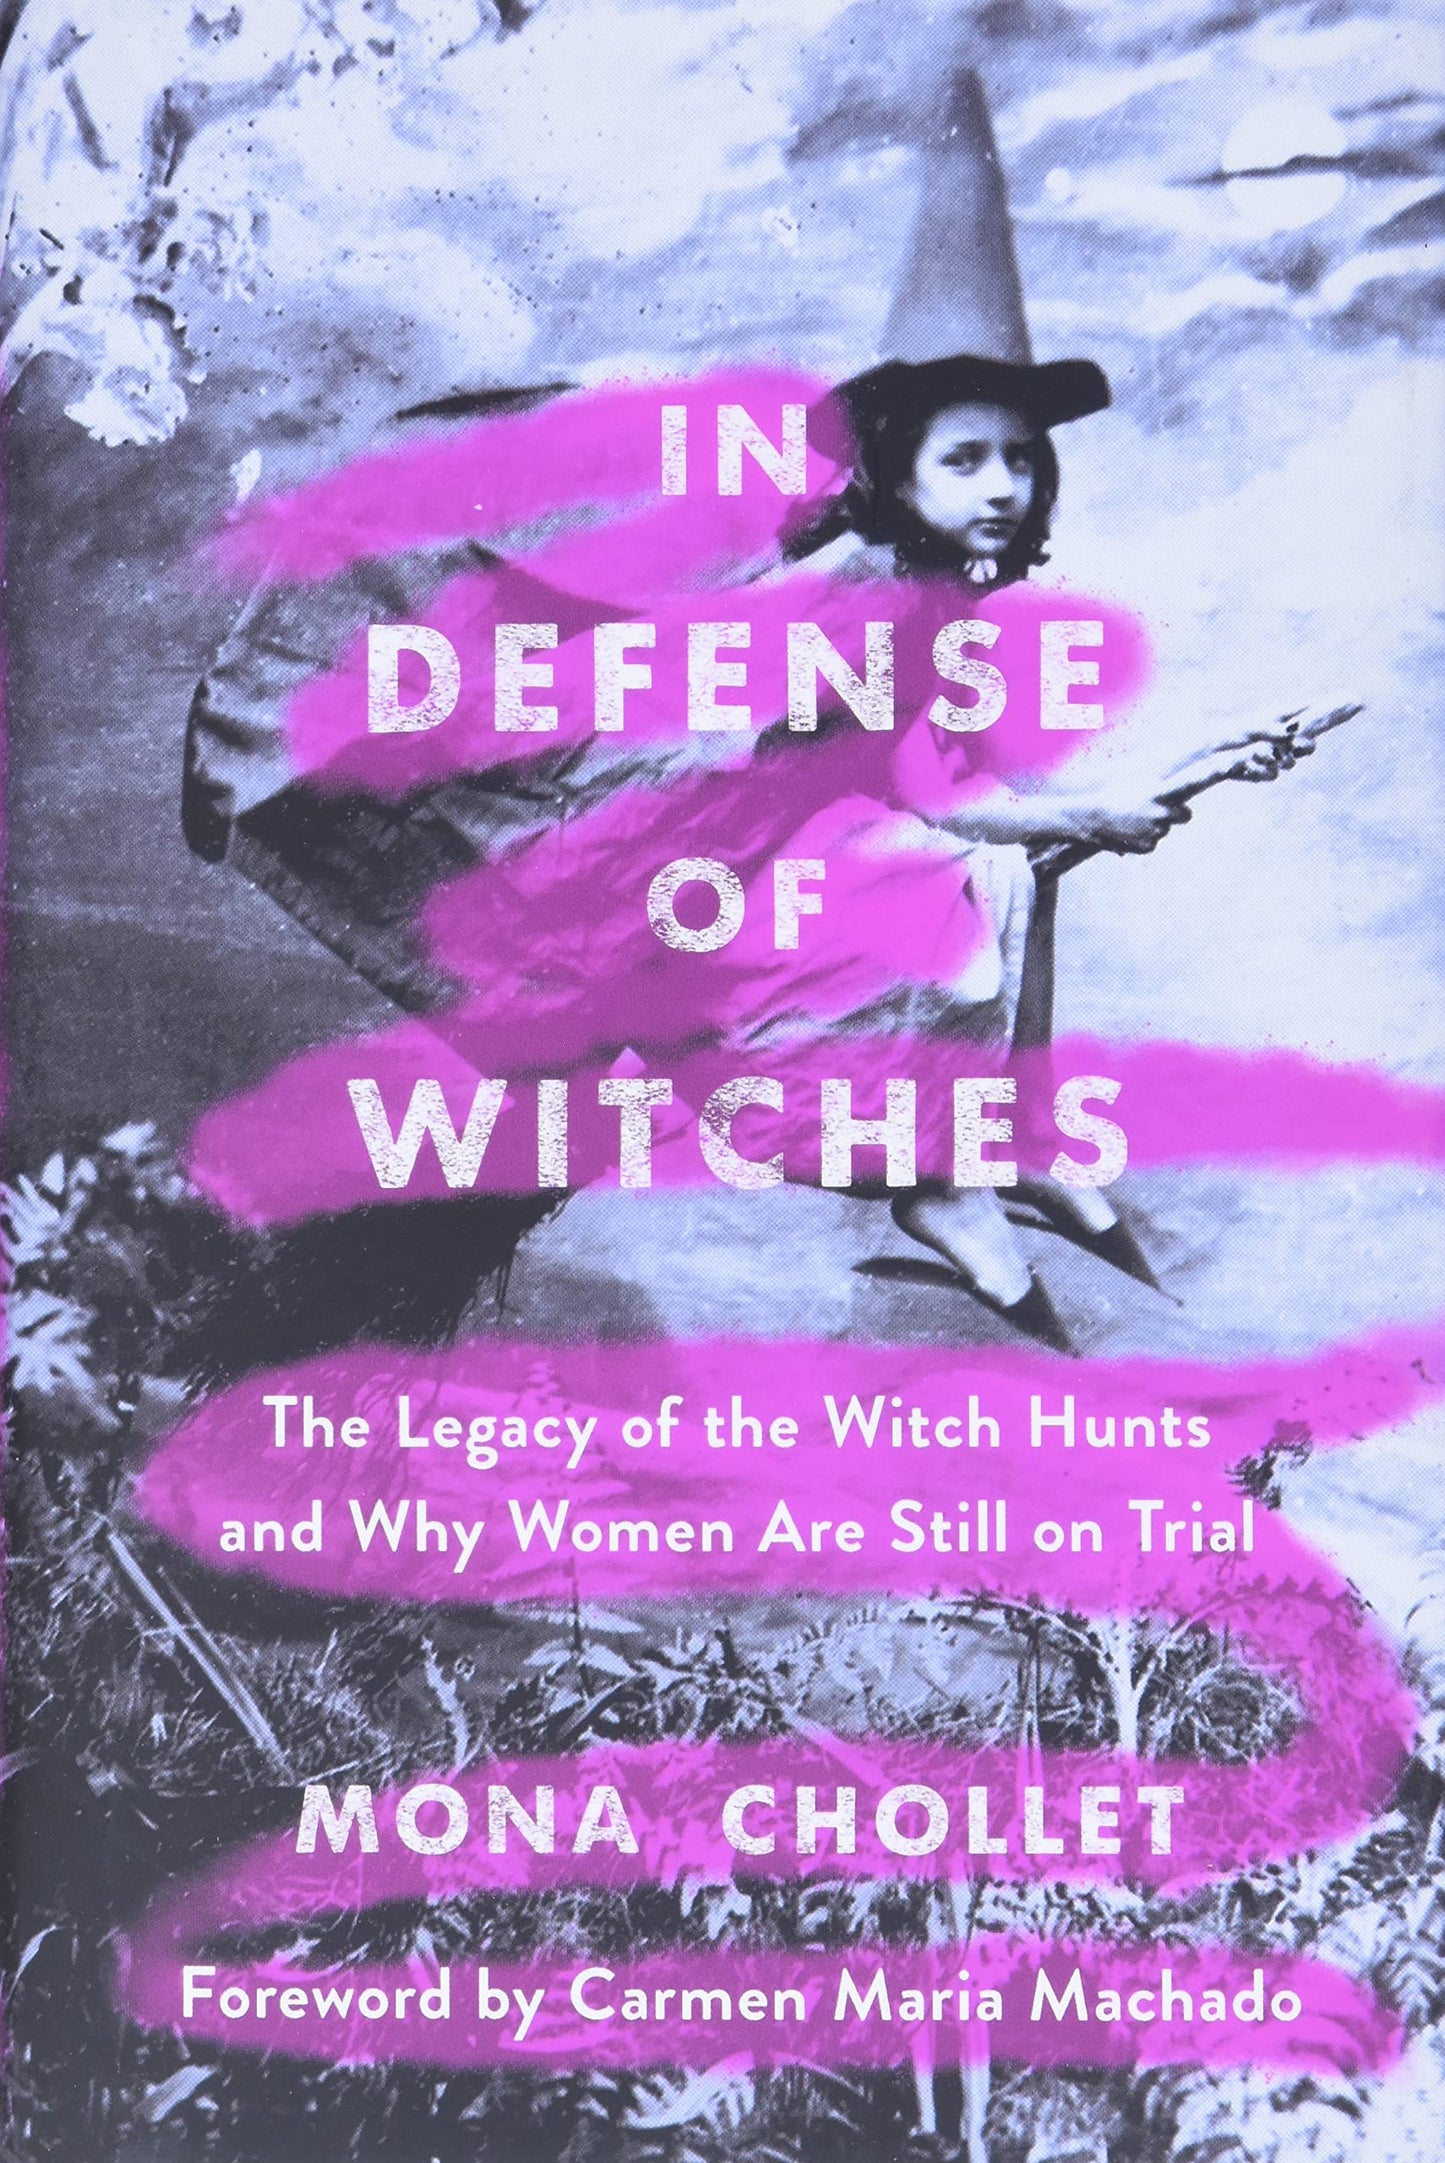 In Defense of Witches, by Mona Chollet